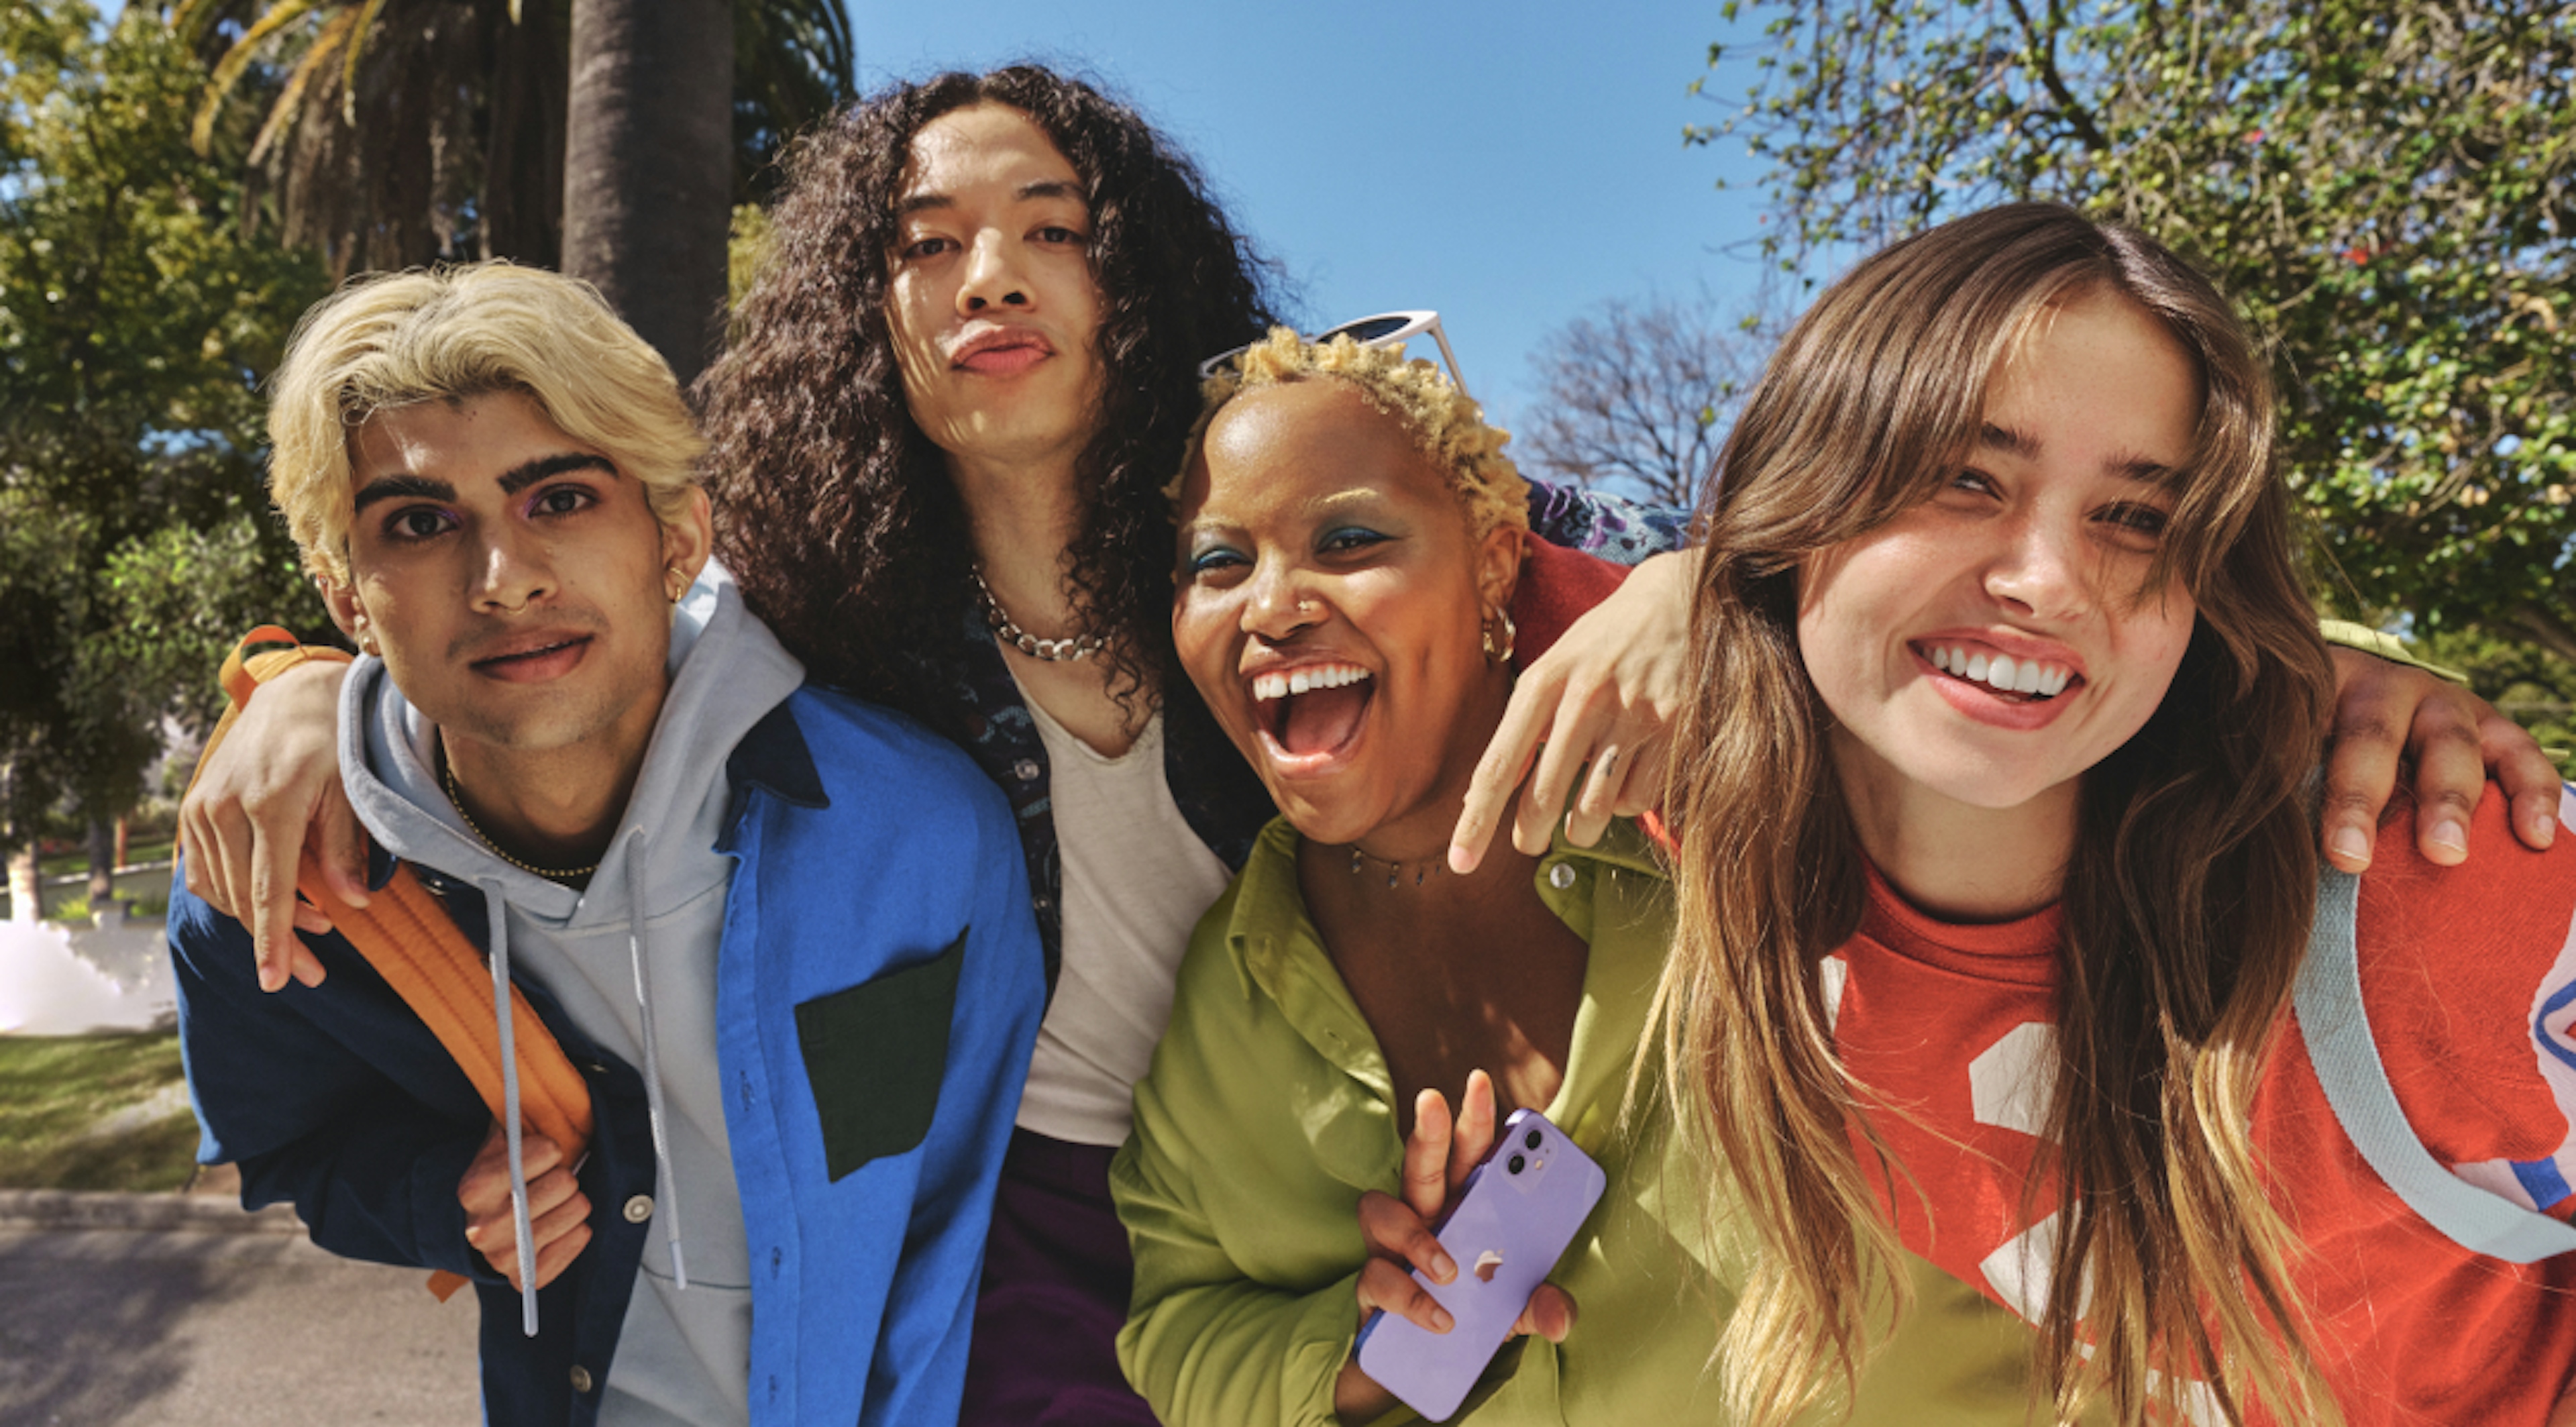 The image shows four young adults closely huddled together, smiling and happy. They are dressed in casual, colorful clothing and are outdoors on a sunny day. One person is holding a smartphone, and they all seem to be enjoying each other's company.